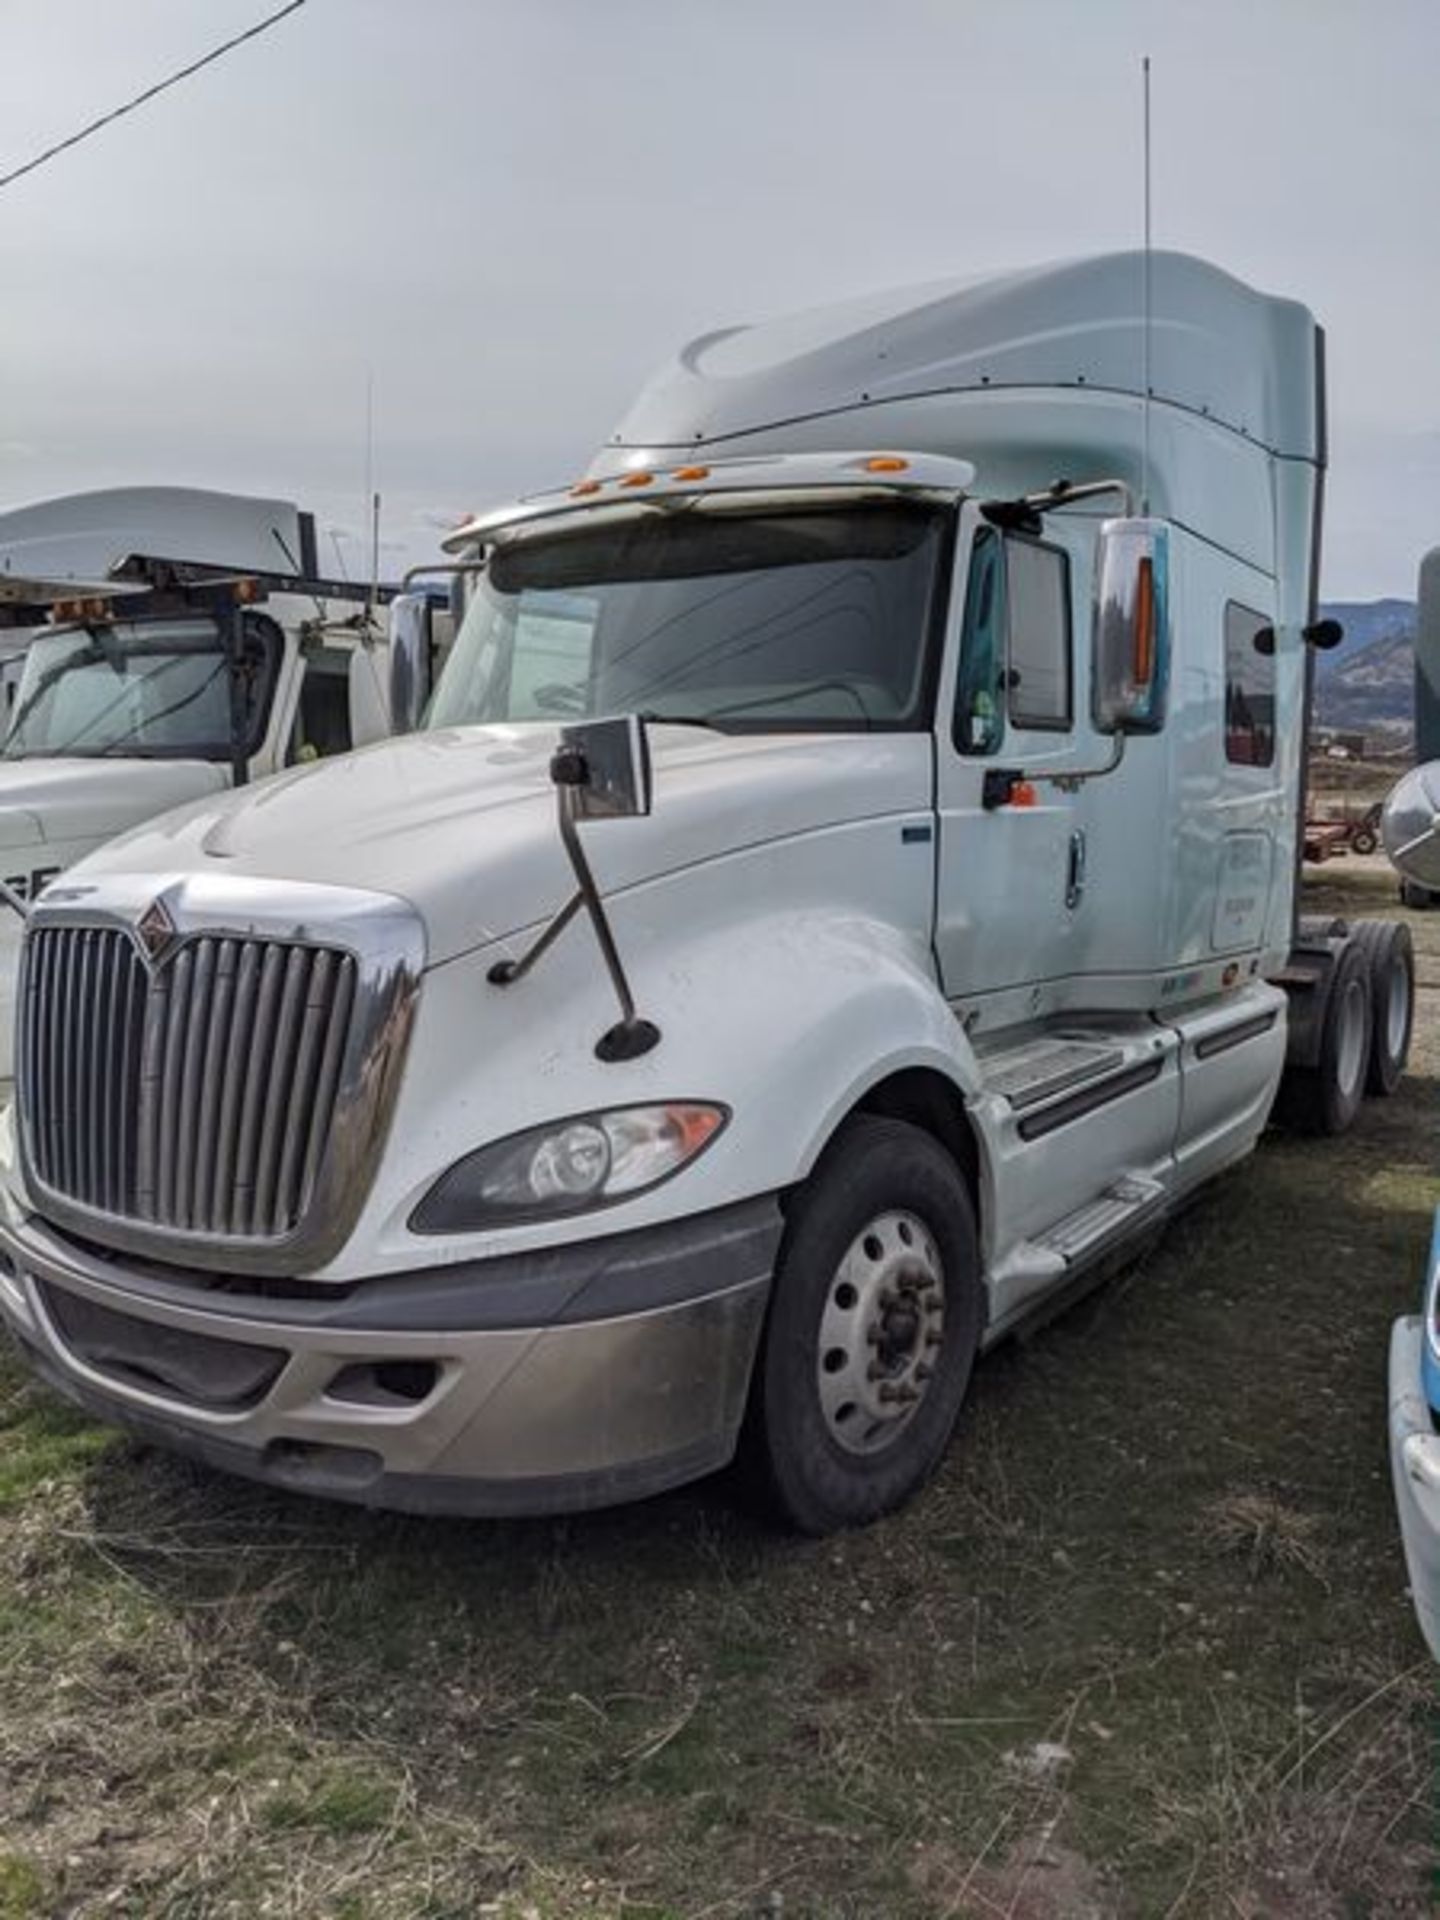 2012 Prostar Eagle- Unit has not run for 16 months